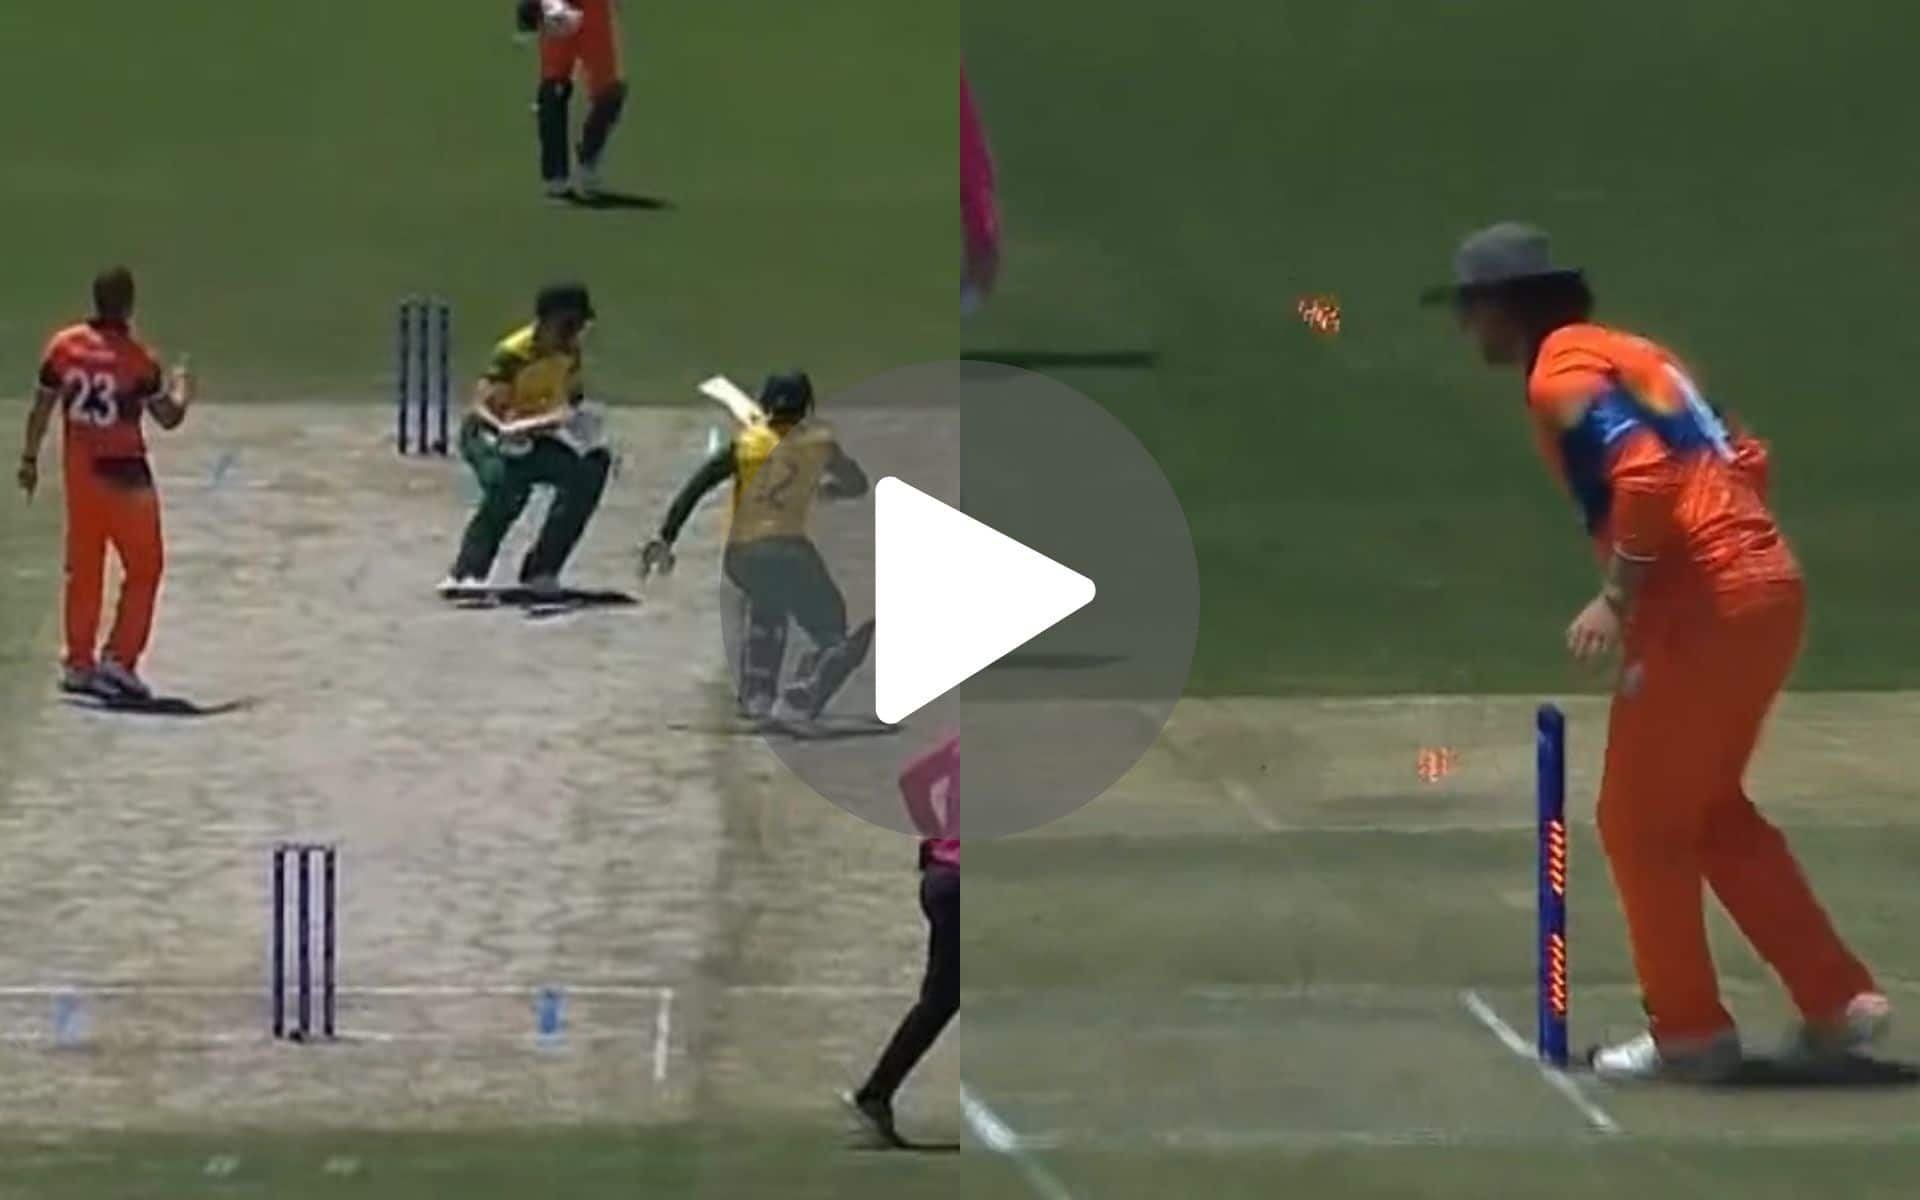 [Watch] Quinton De Kock Falls For A Diamond Duck After His Horrible Mix-Up With Hendricks